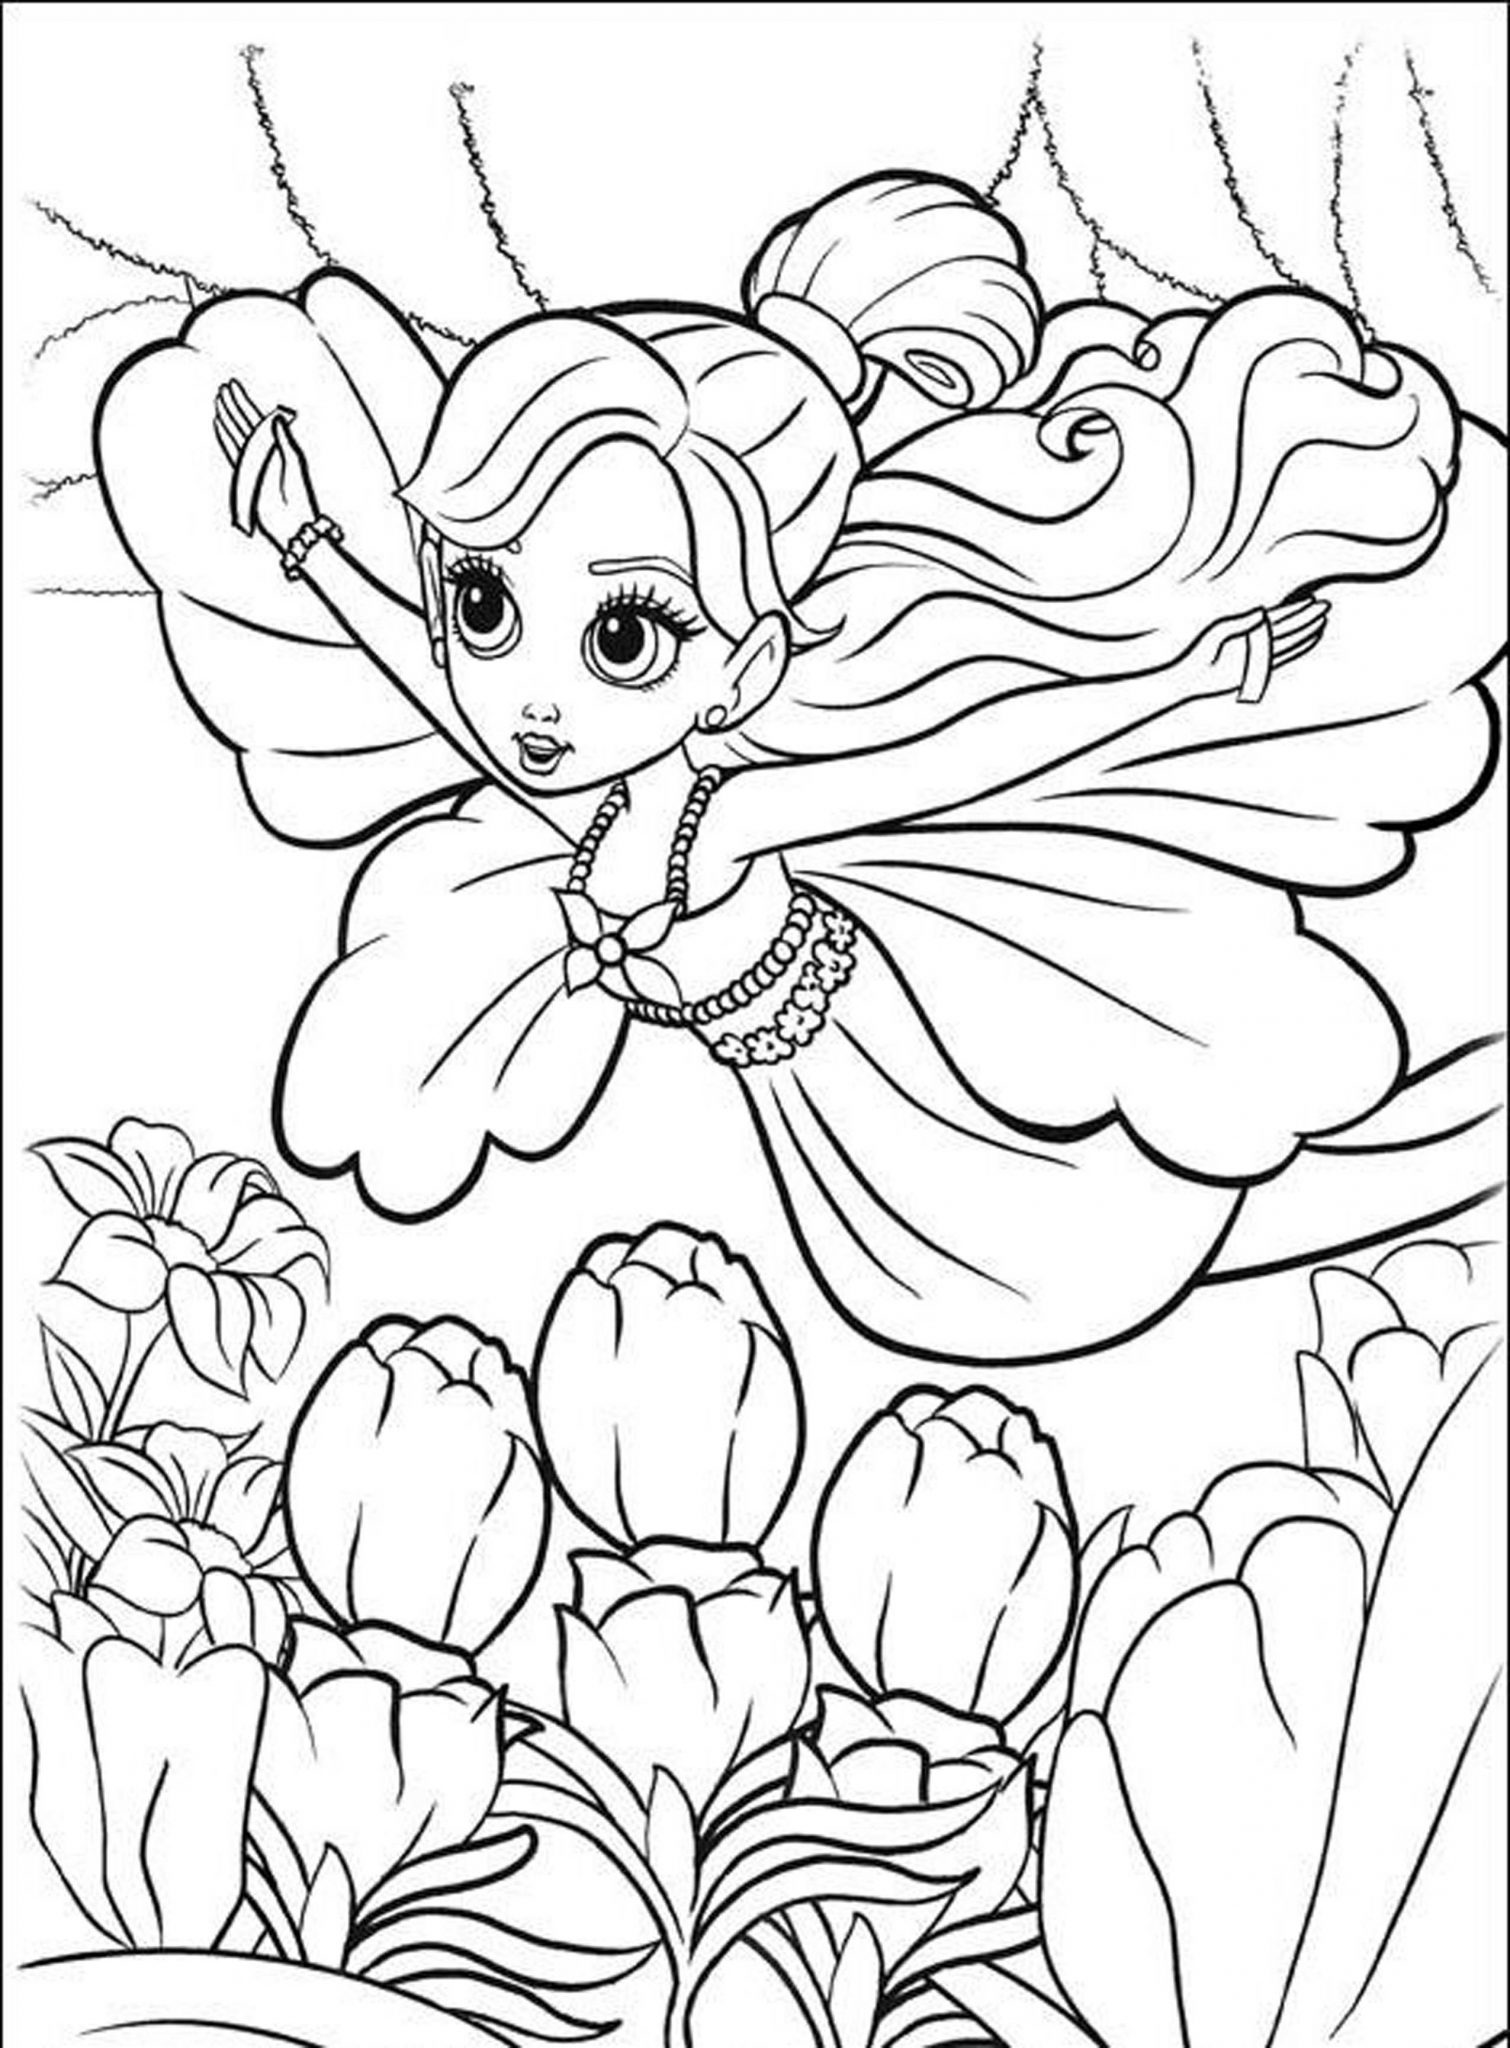 Download Print & Download - Coloring Pages for Girls, Recommend a ...